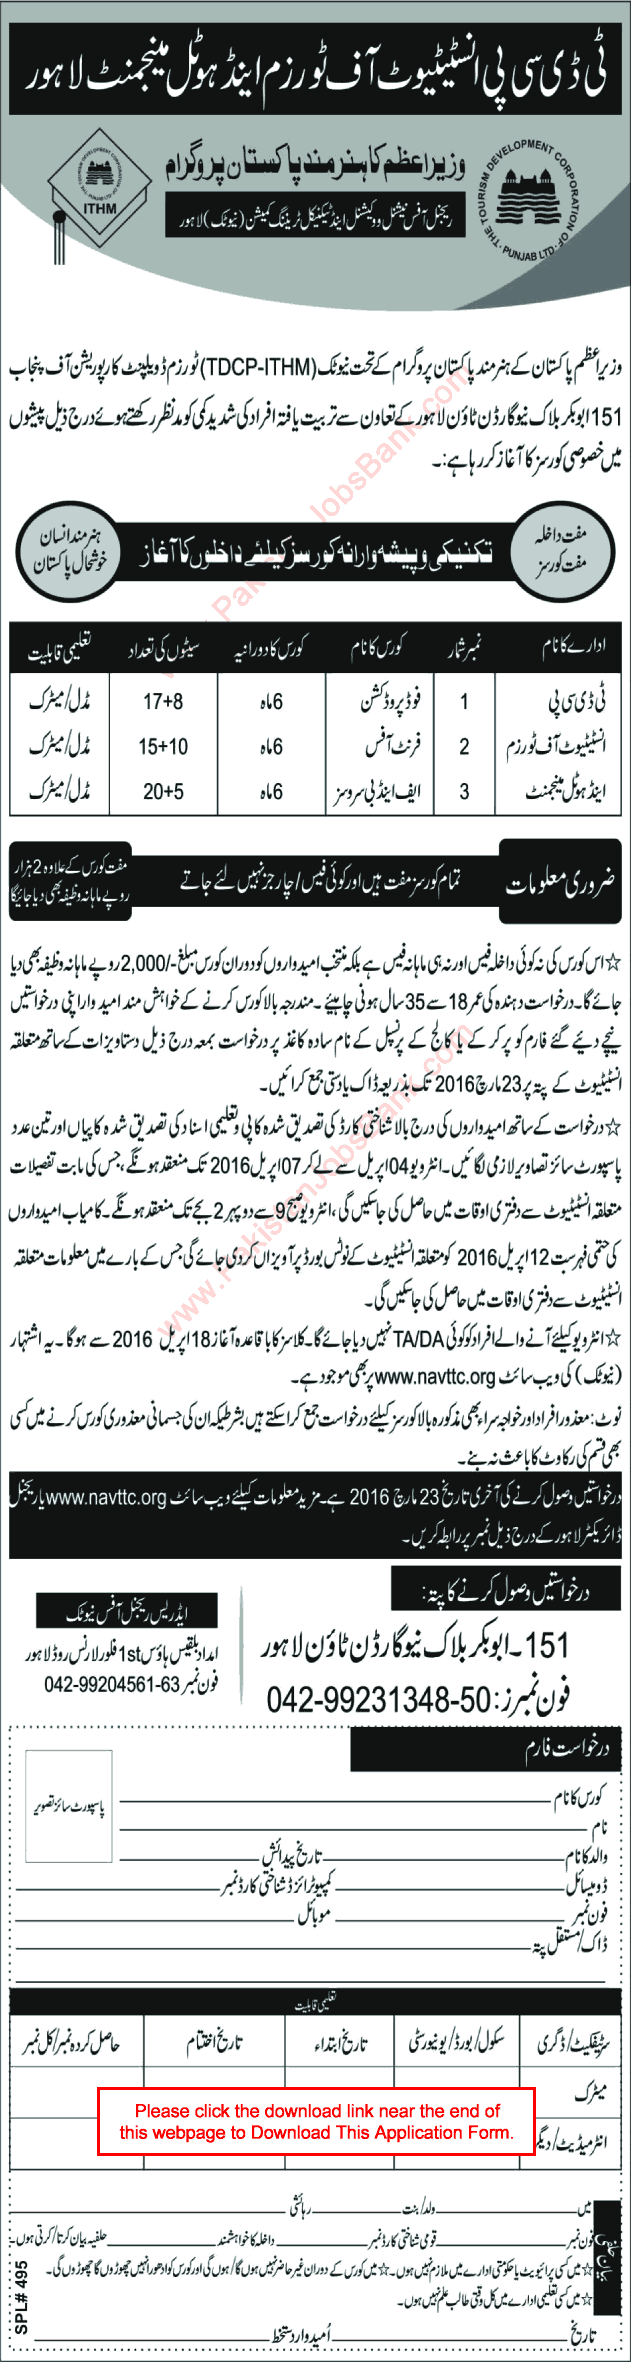 NAVTTC Free Courses in Lahore 2016 March Application Form TDCP Institute of Tourism & Hotel Management Latest